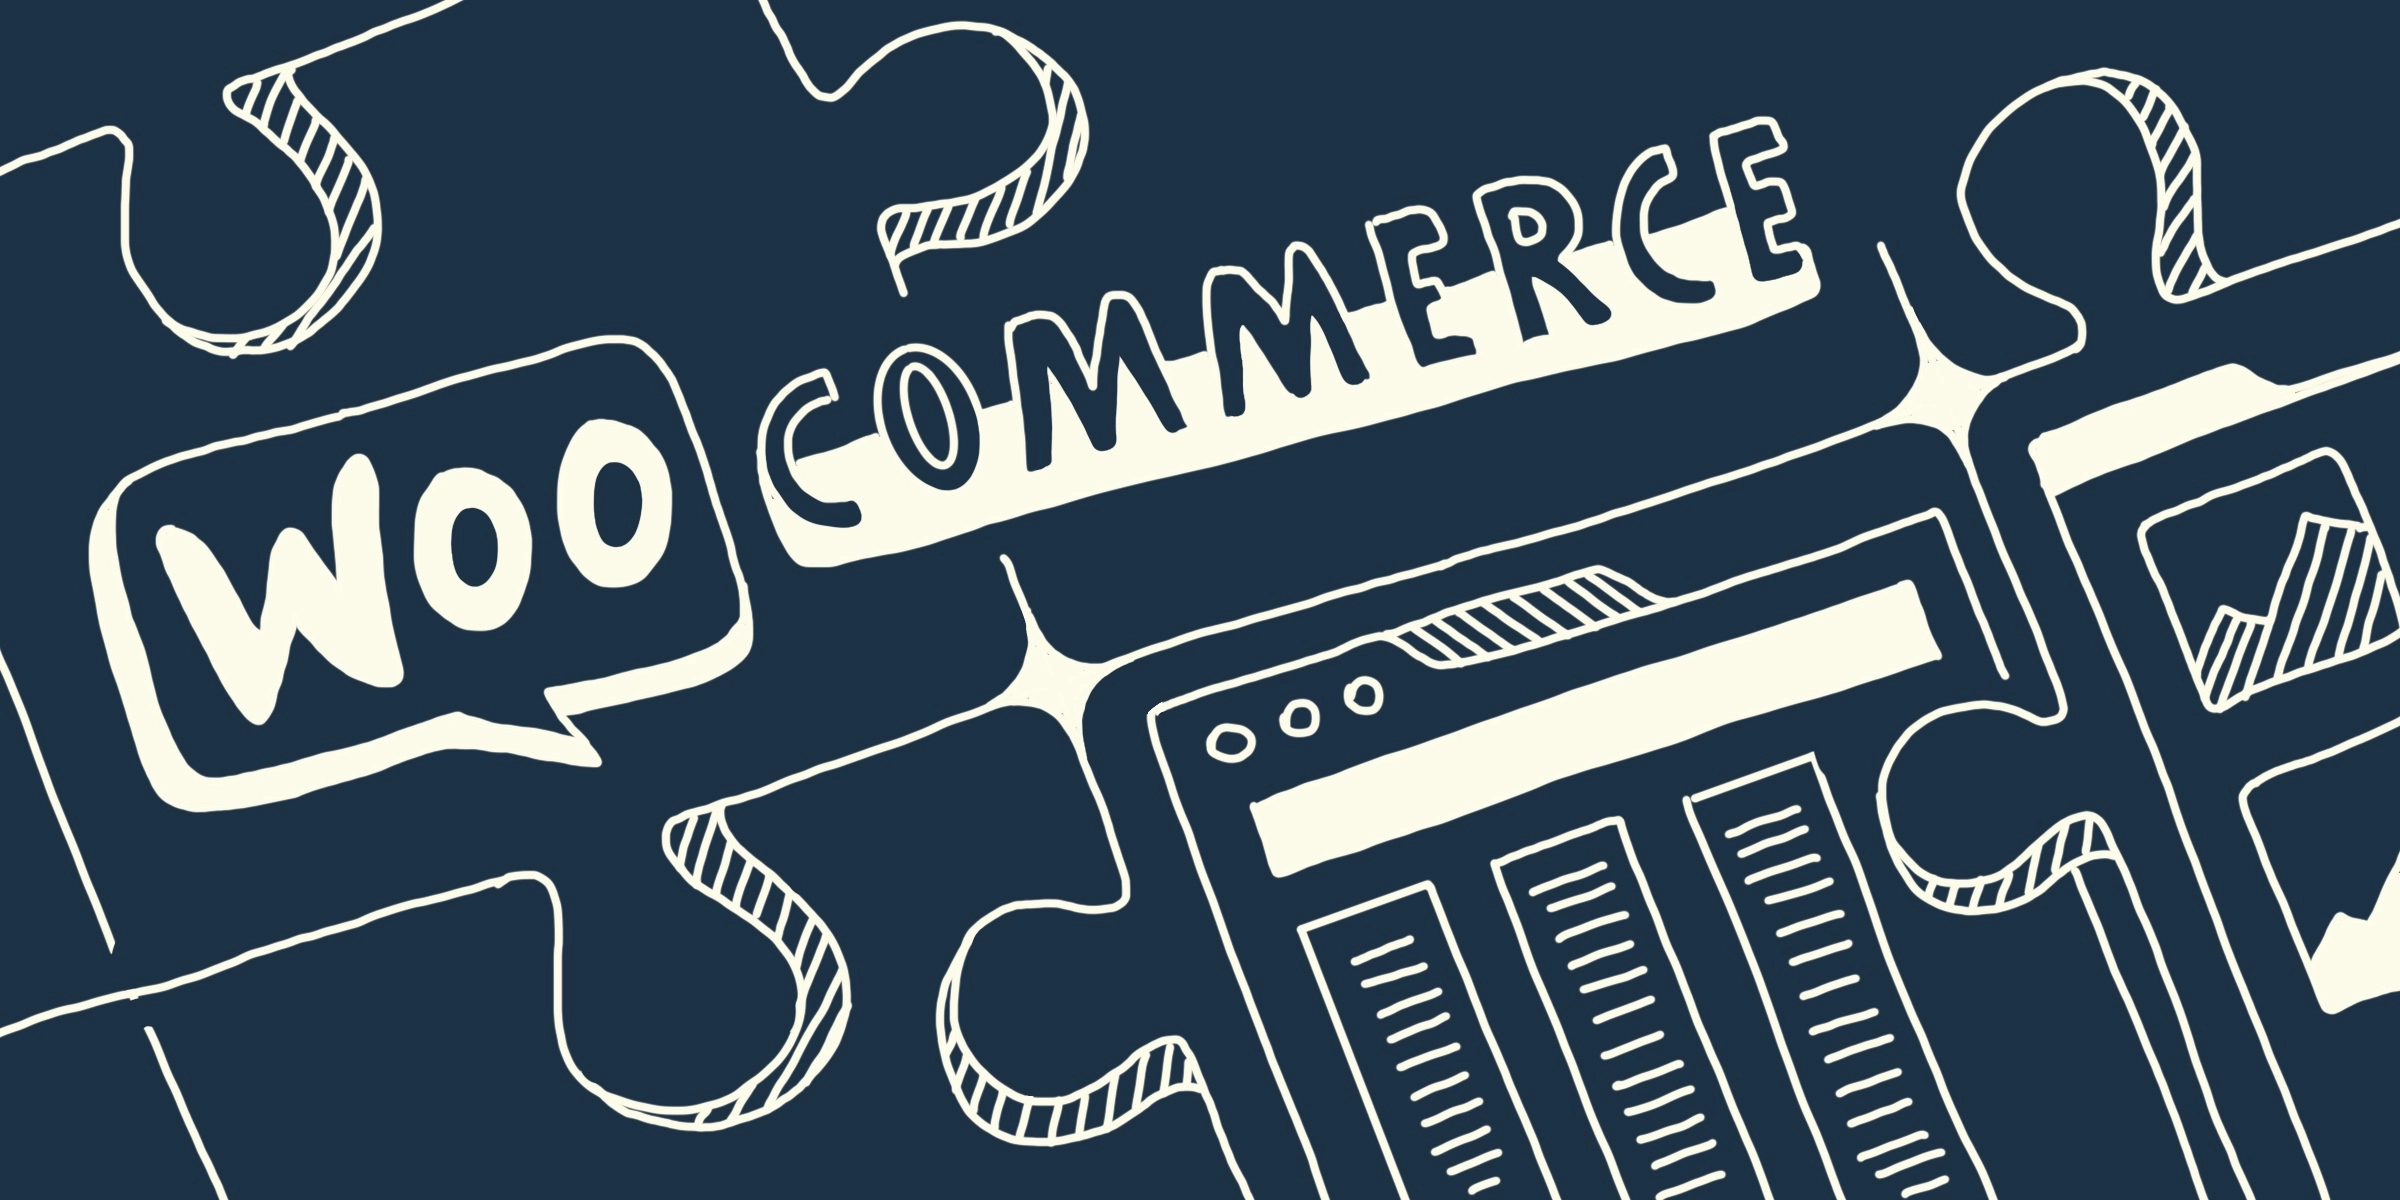 How to Add WooCommerce support